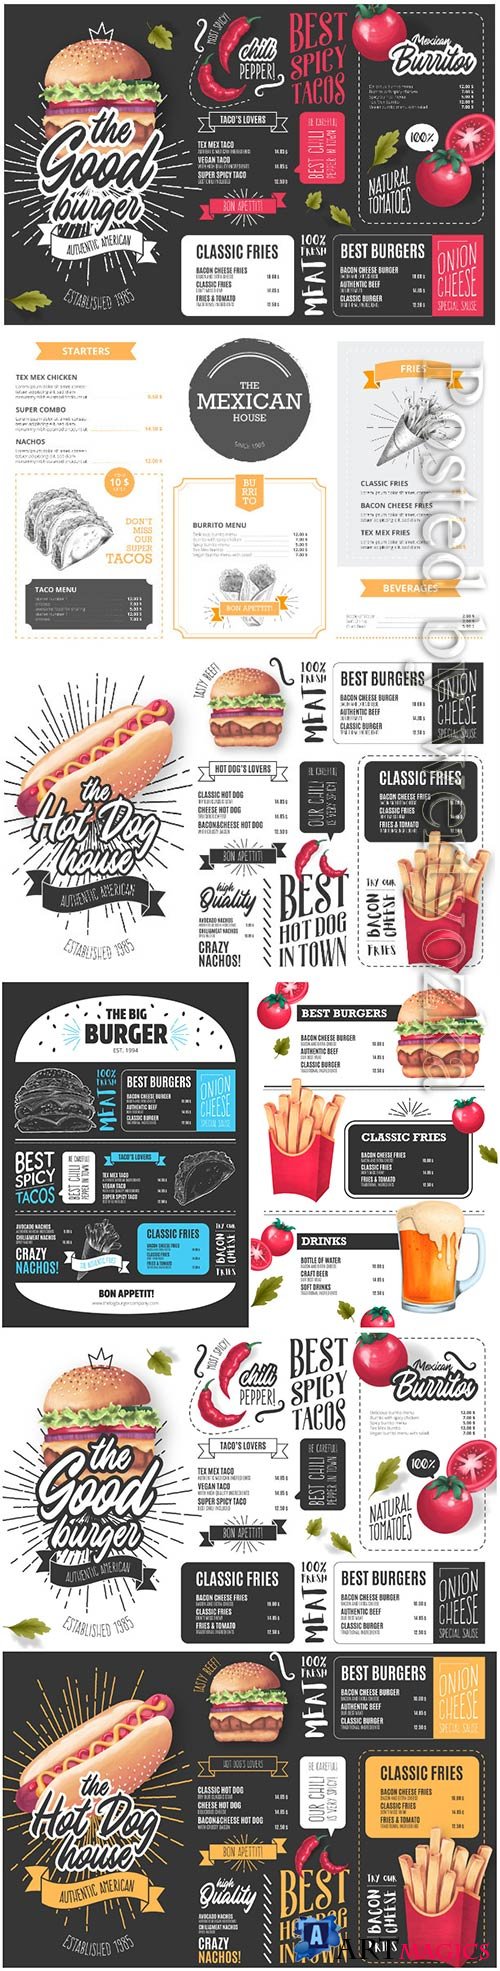 Vector restaurant menu template with illustrations